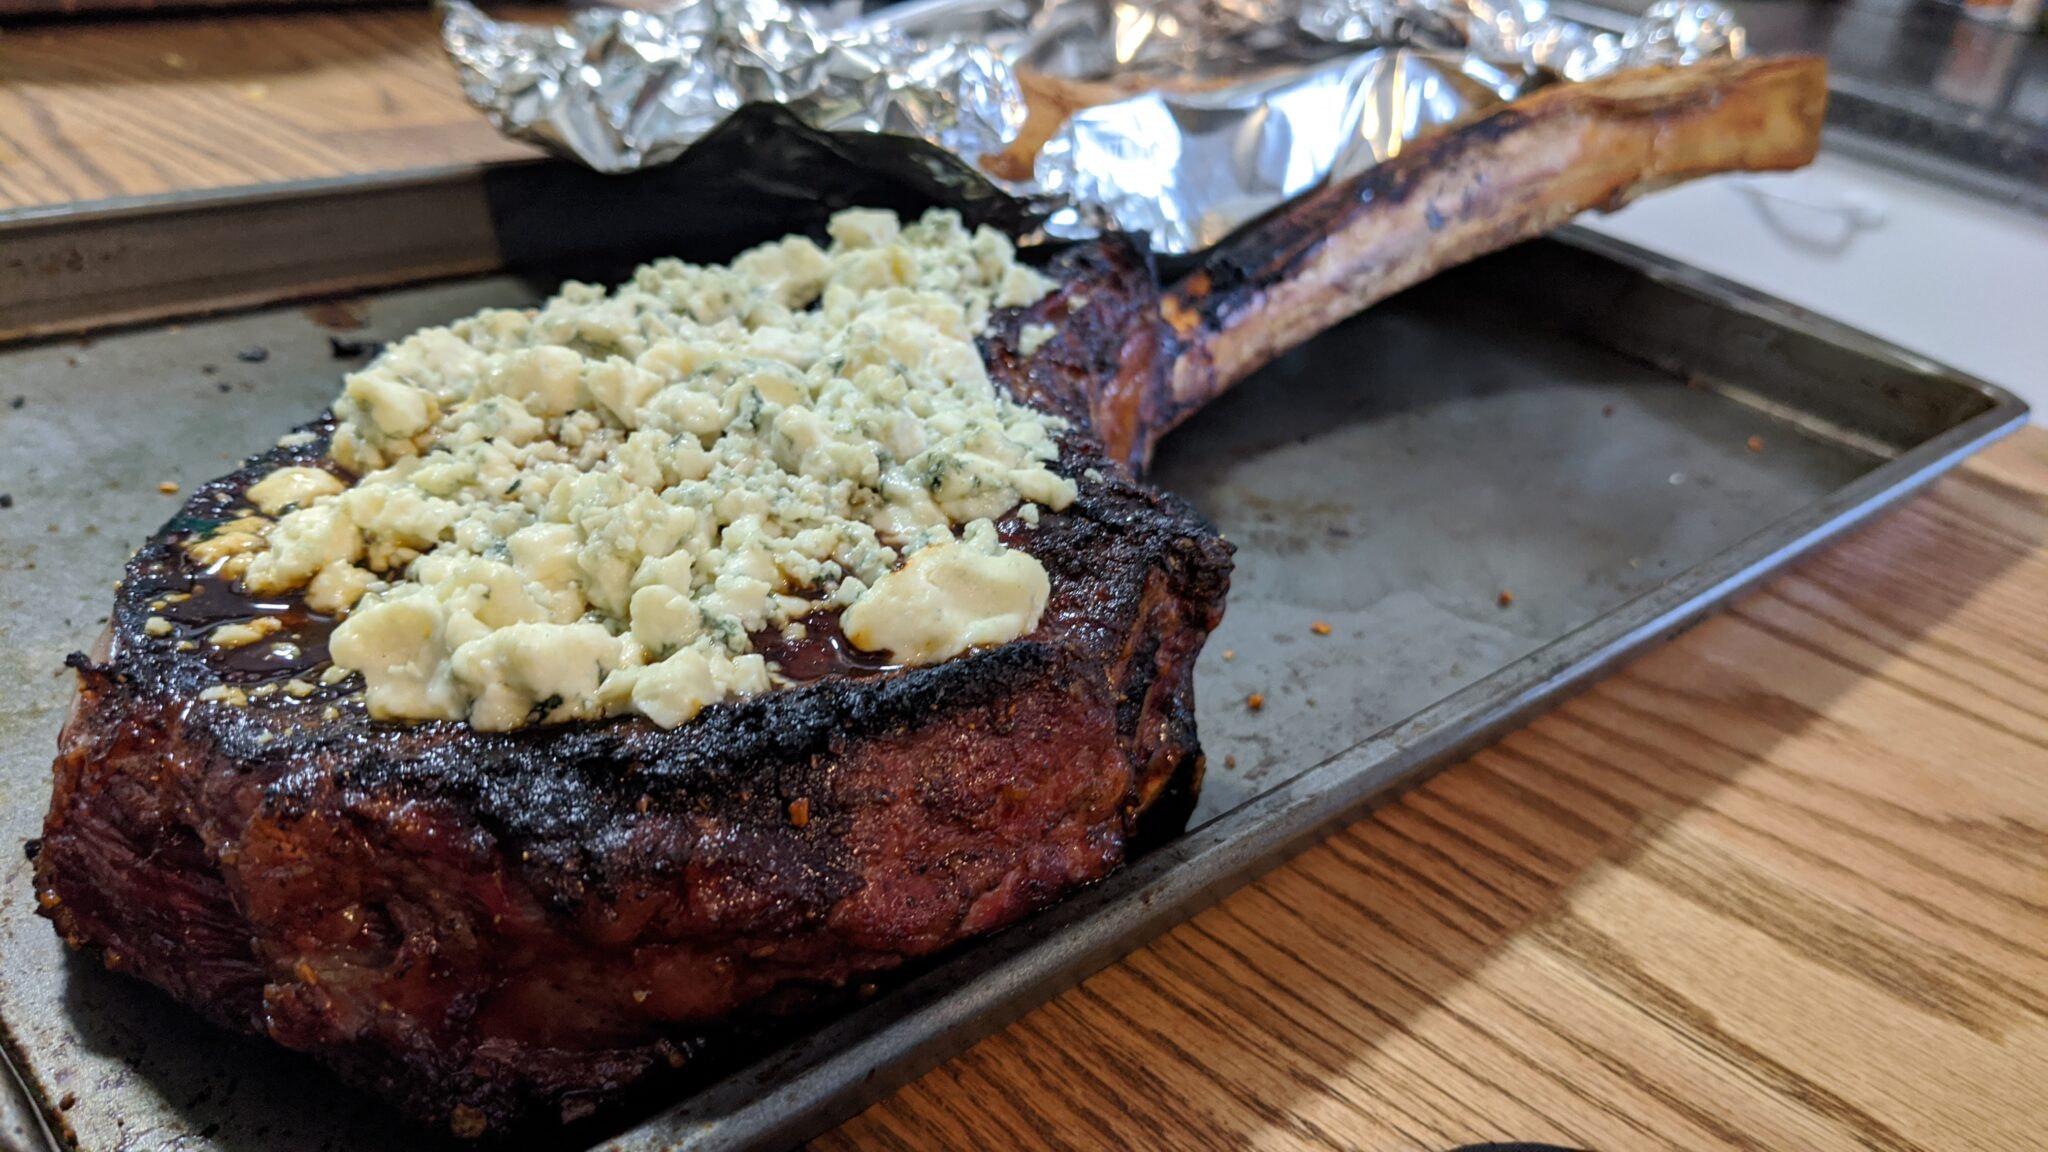 Tomahawk steak with blue cheese crumble done on the grill.